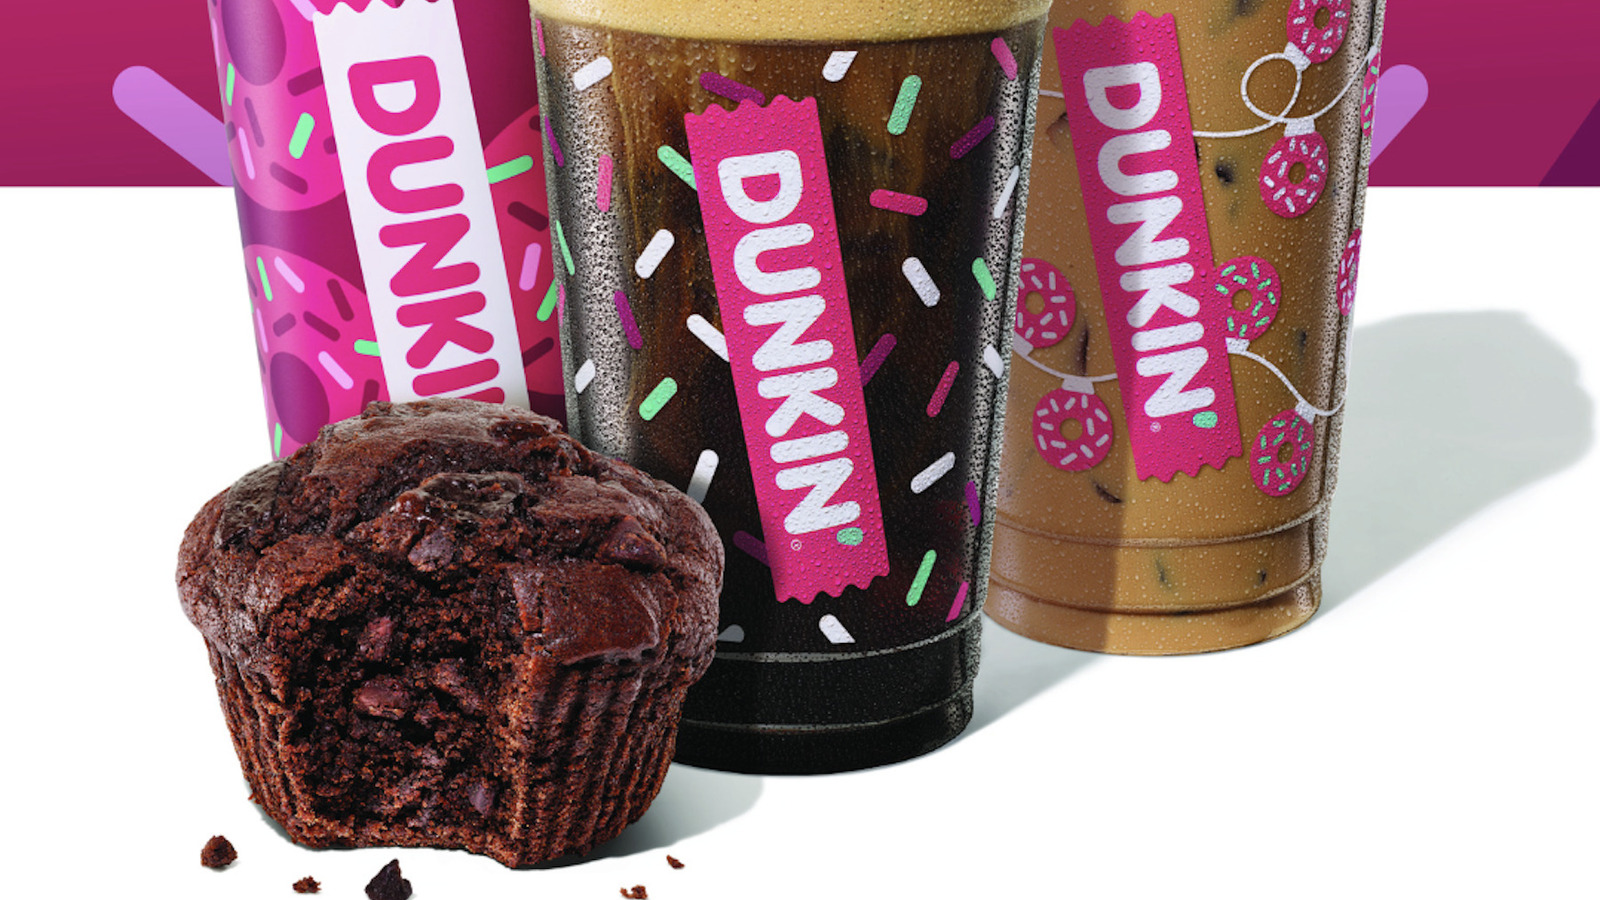 Dunkin's Holiday Menu Includes a New Cookie Butter Cold Brew